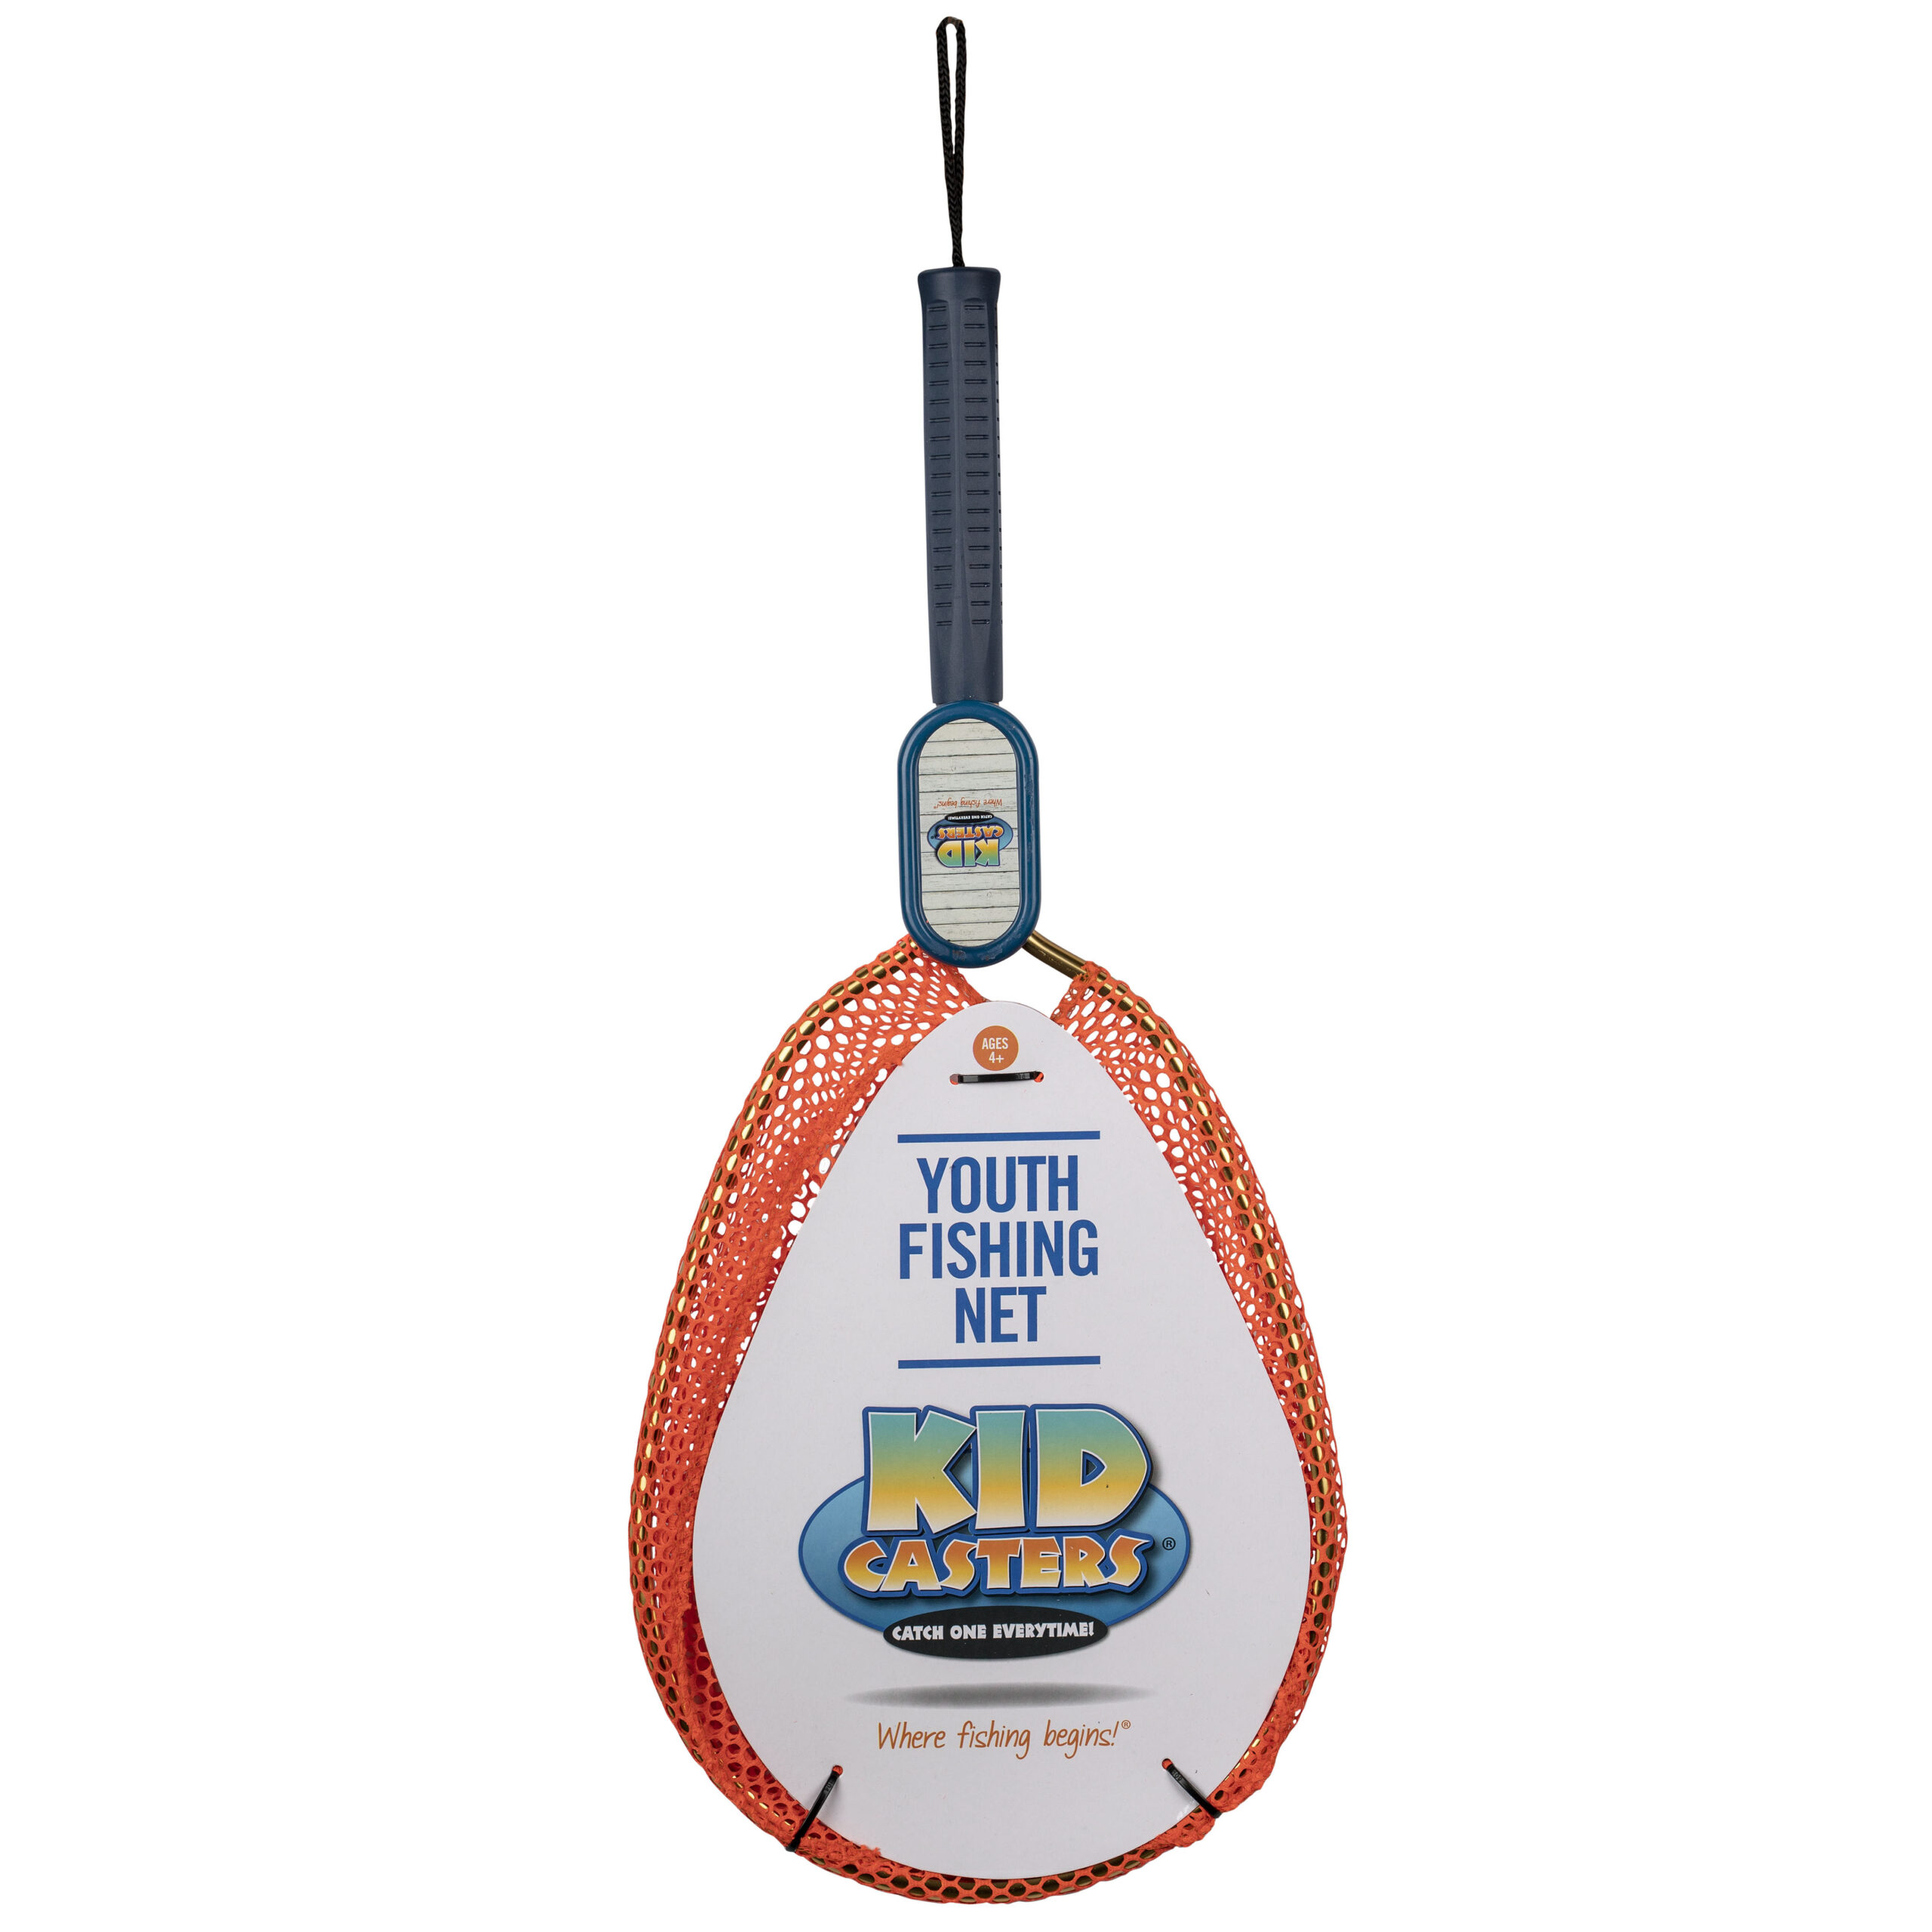 Kid Casters Kid Casters Net  15% Off Free Shipping over $49!